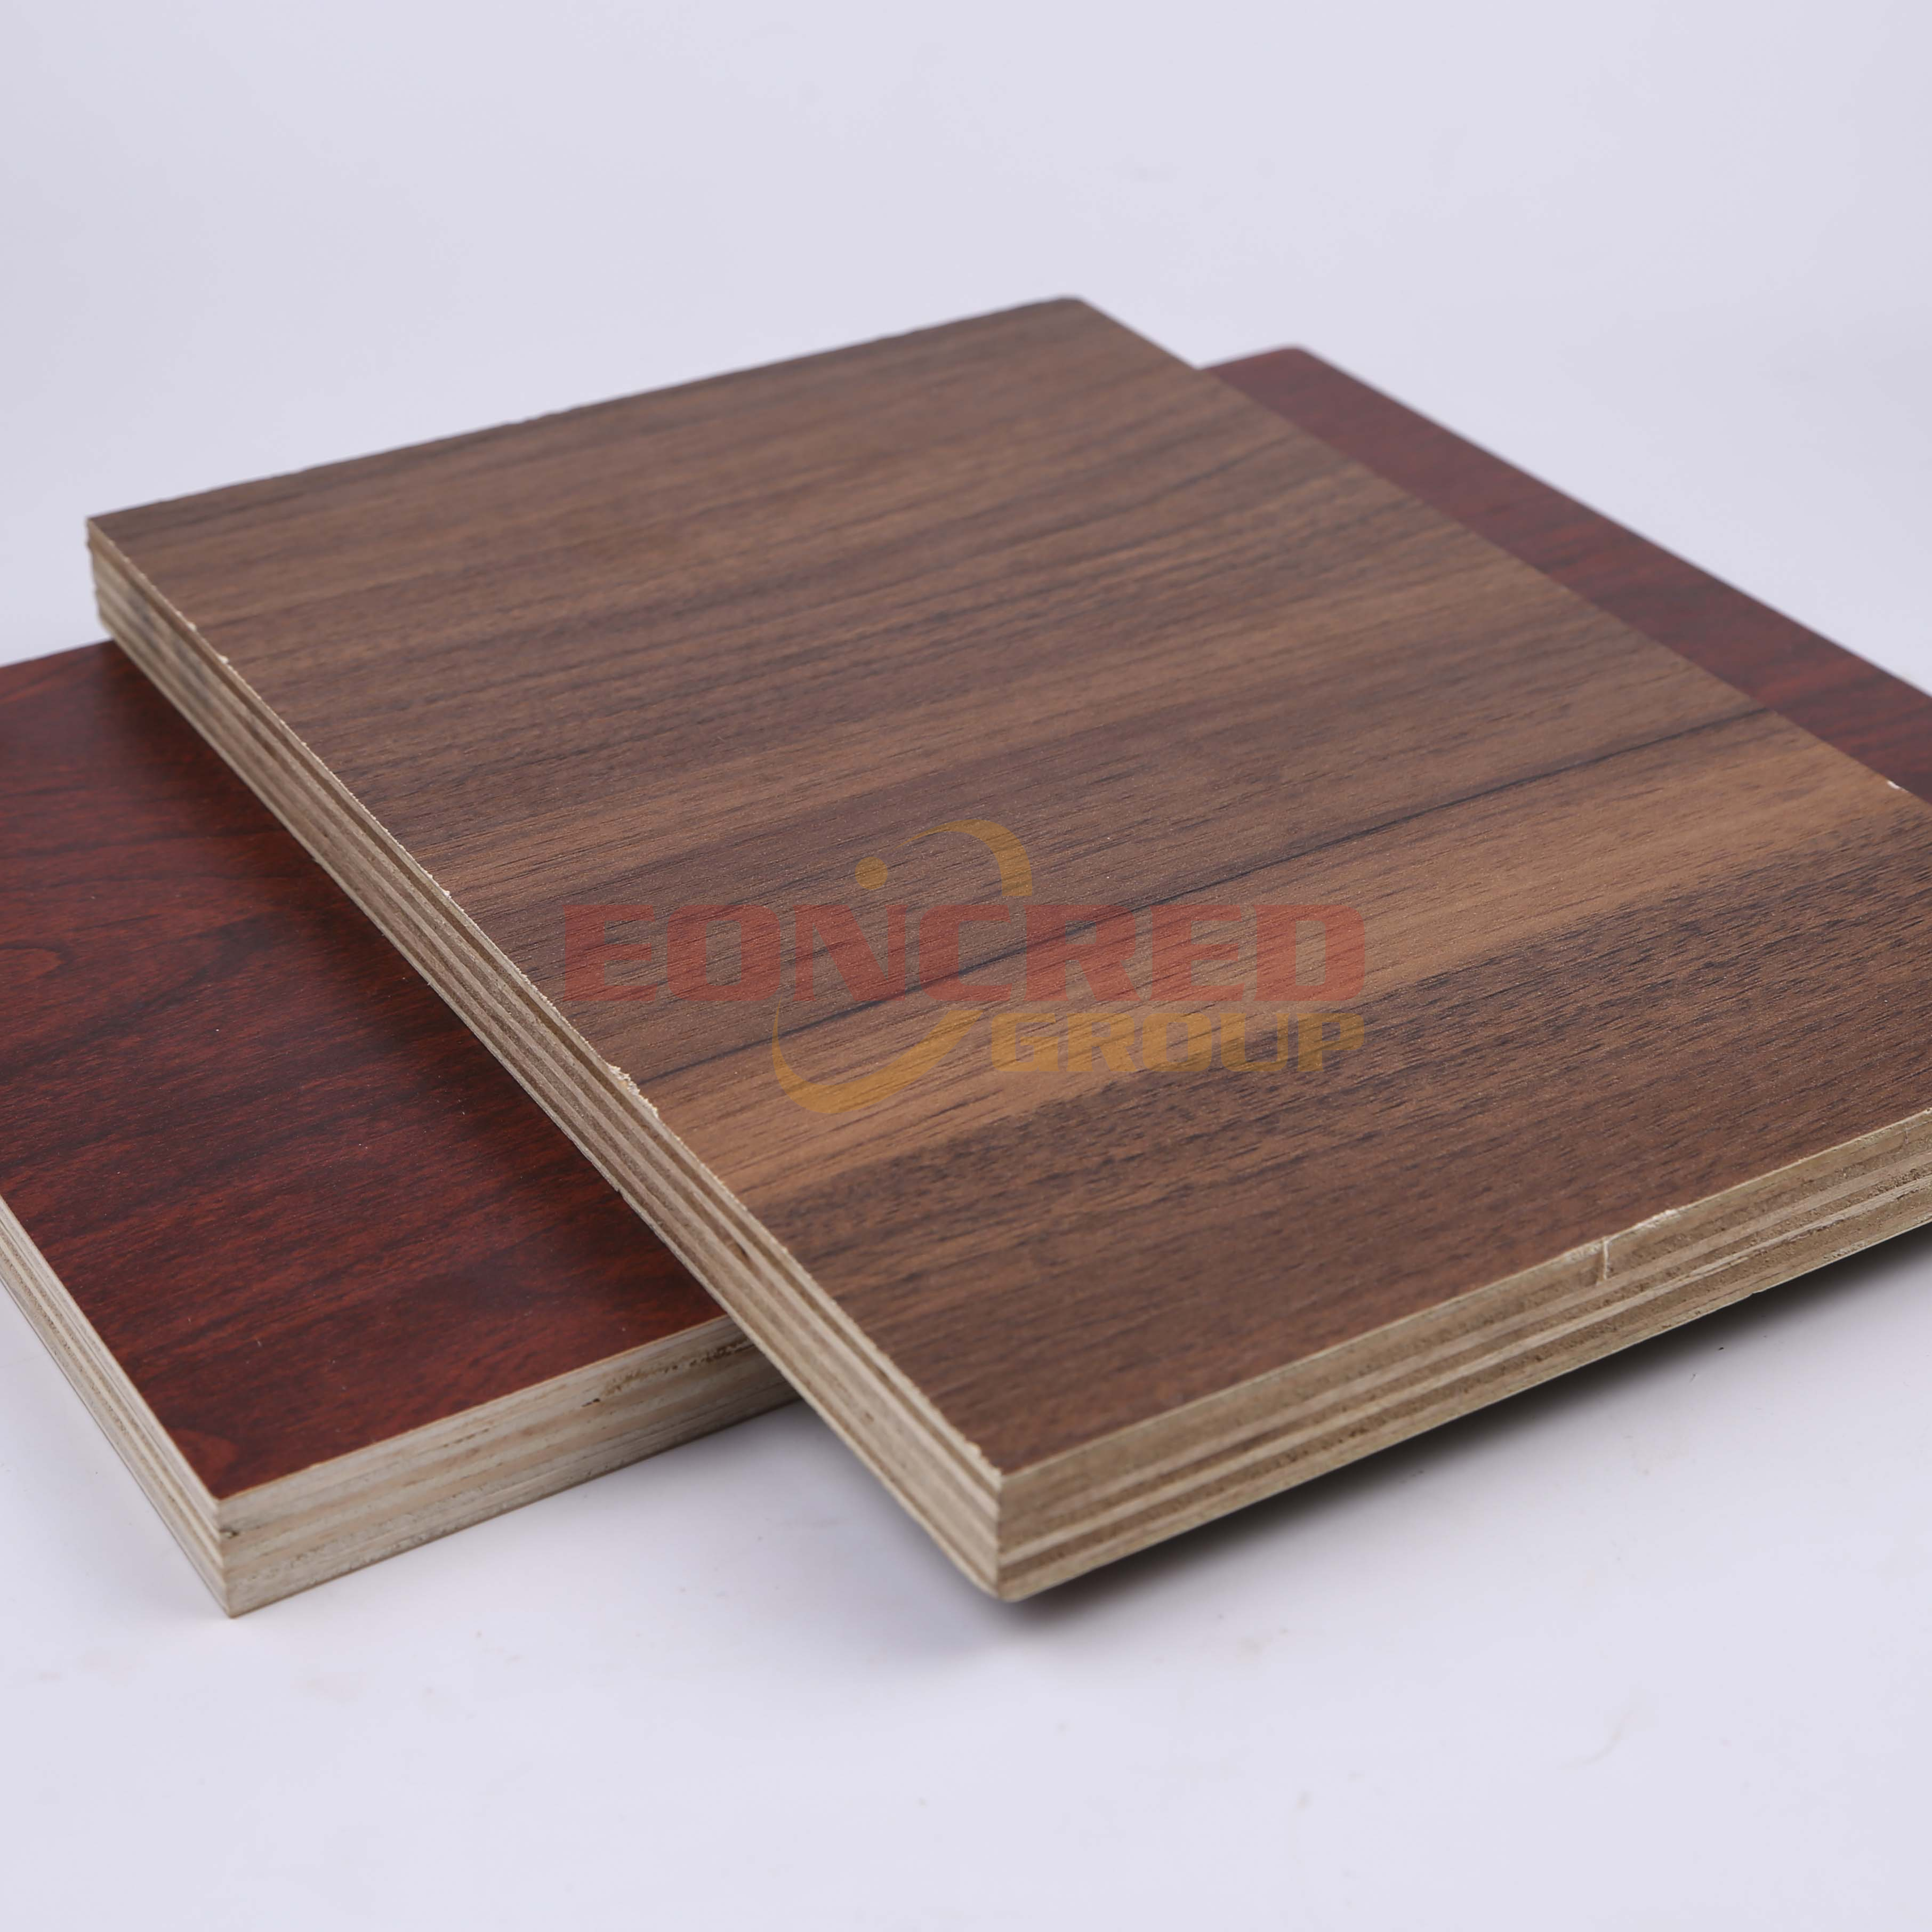 8mm 4x8 stack laminated plywood furniture